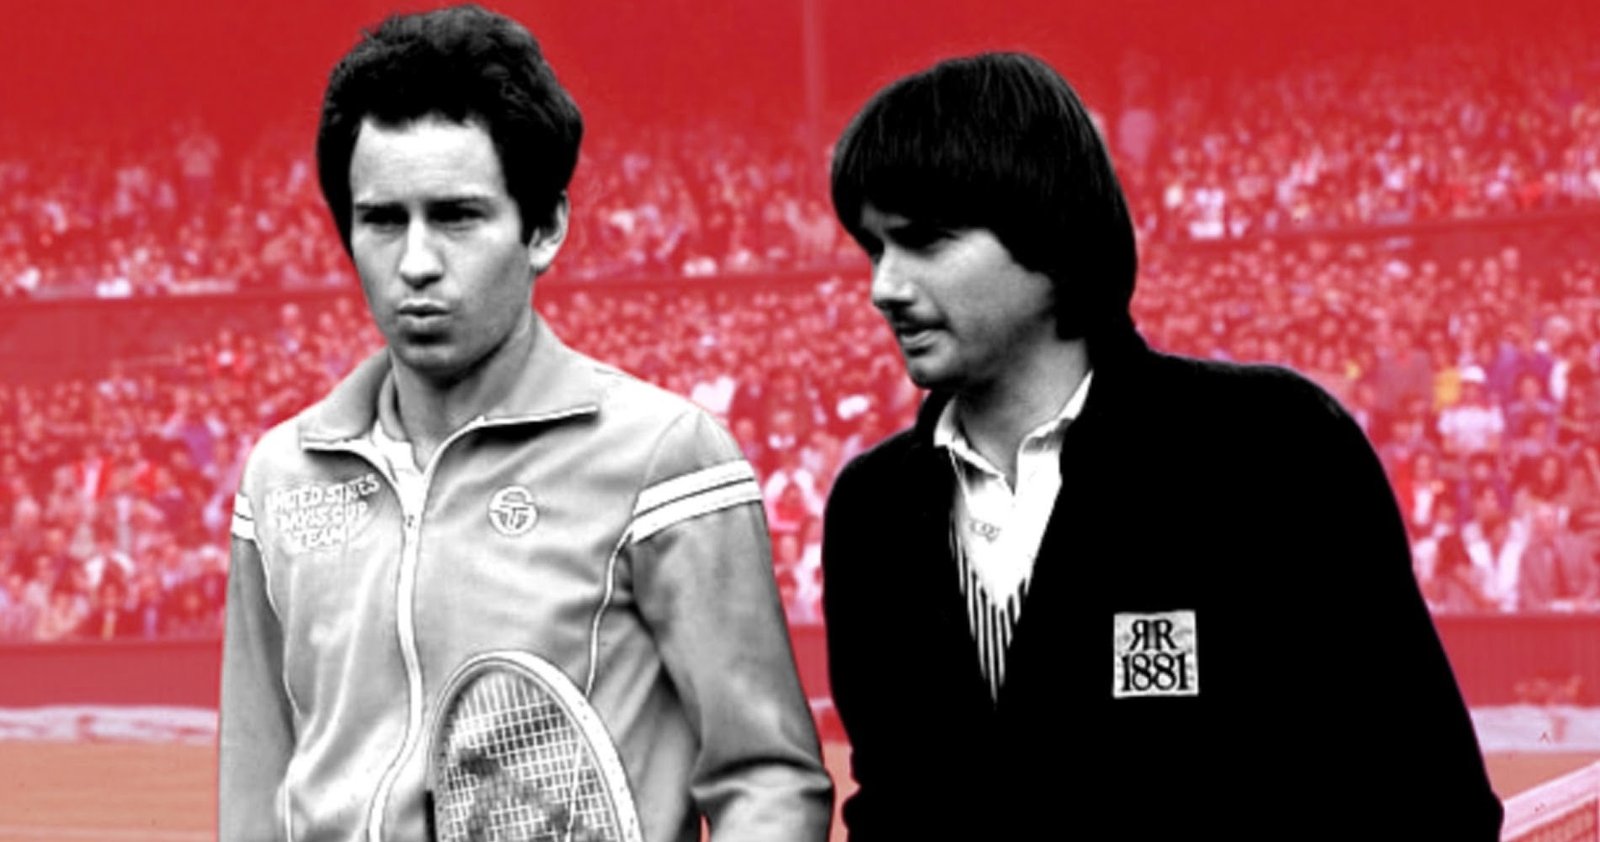 The day Sweden upended McEnroe and Connors in the Davis Cup